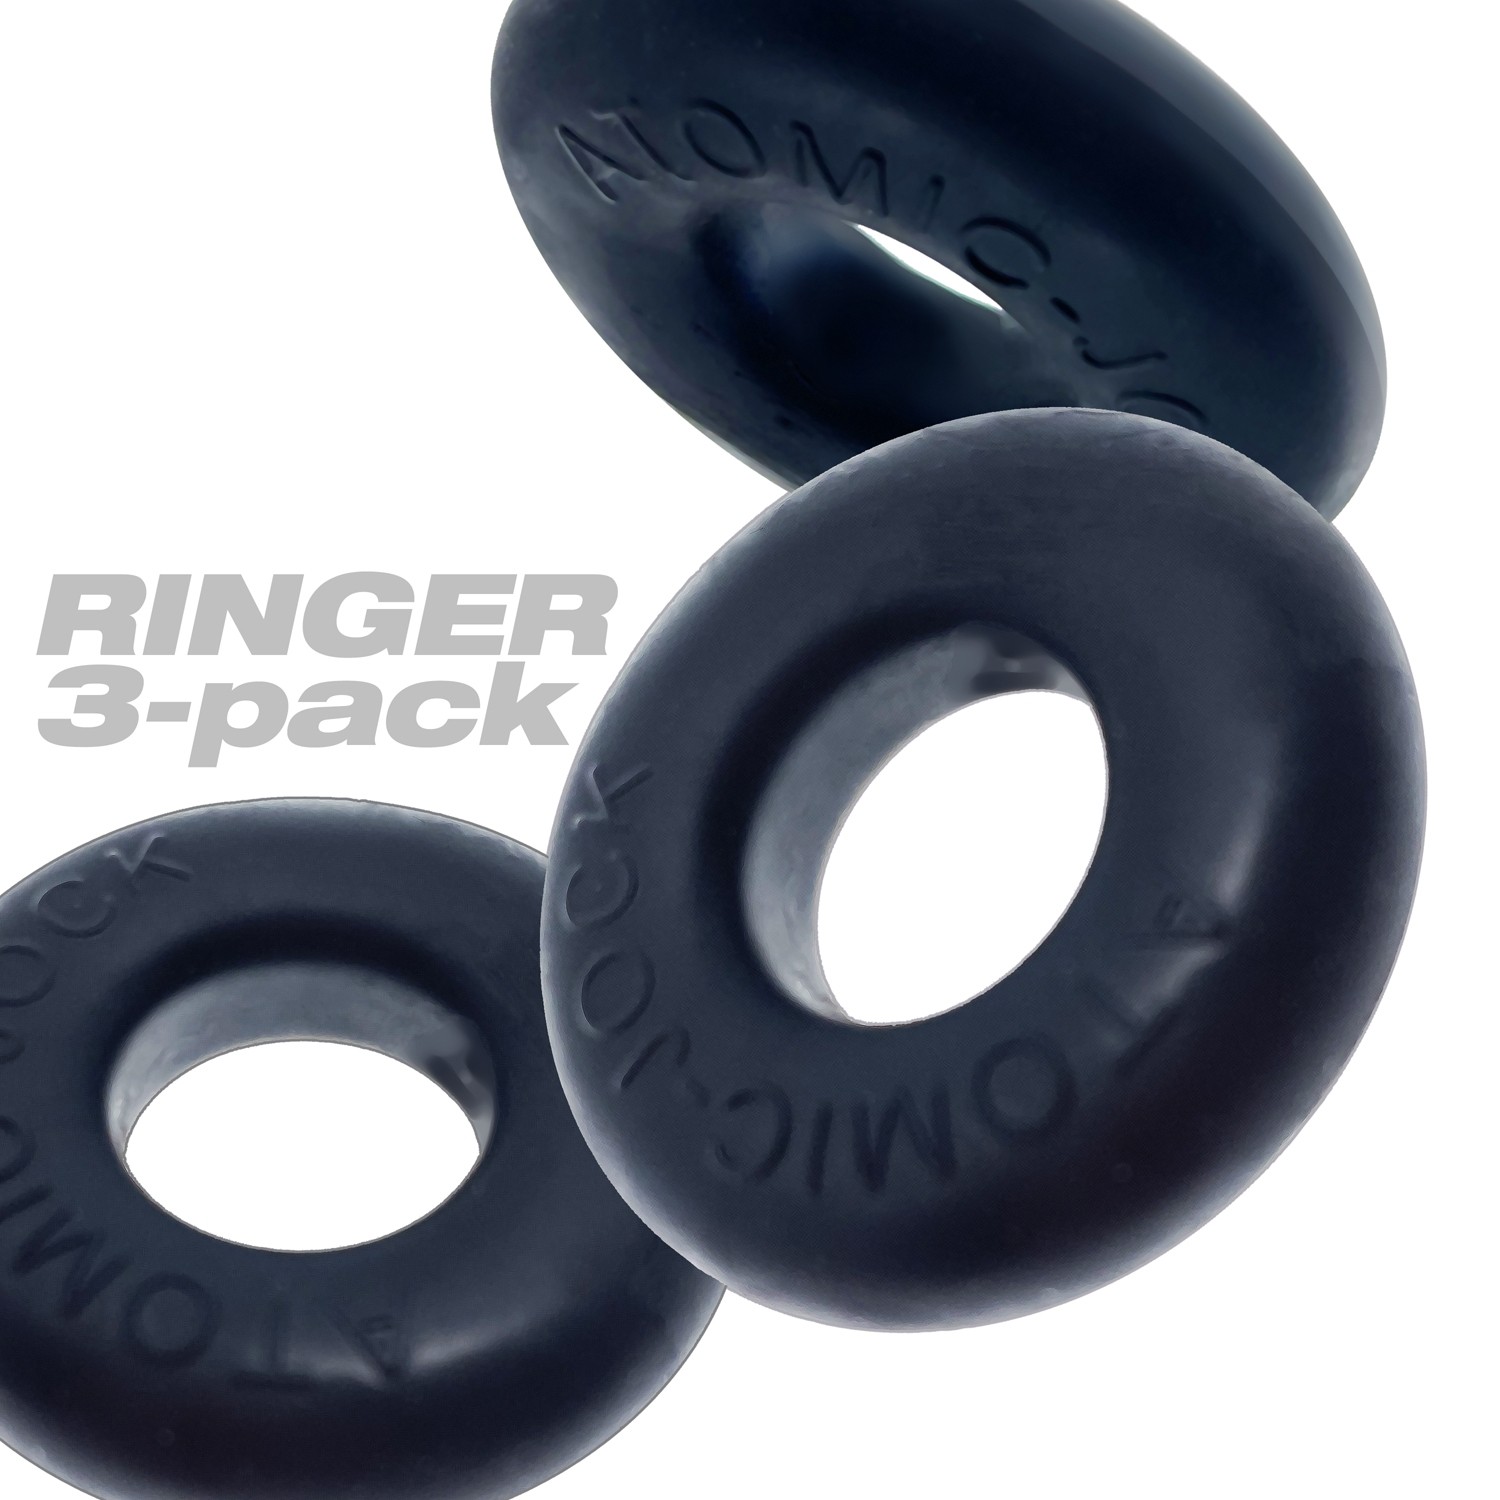 RINGER 3 PK COCKRING NIGHT (NET) - Click Image to Close